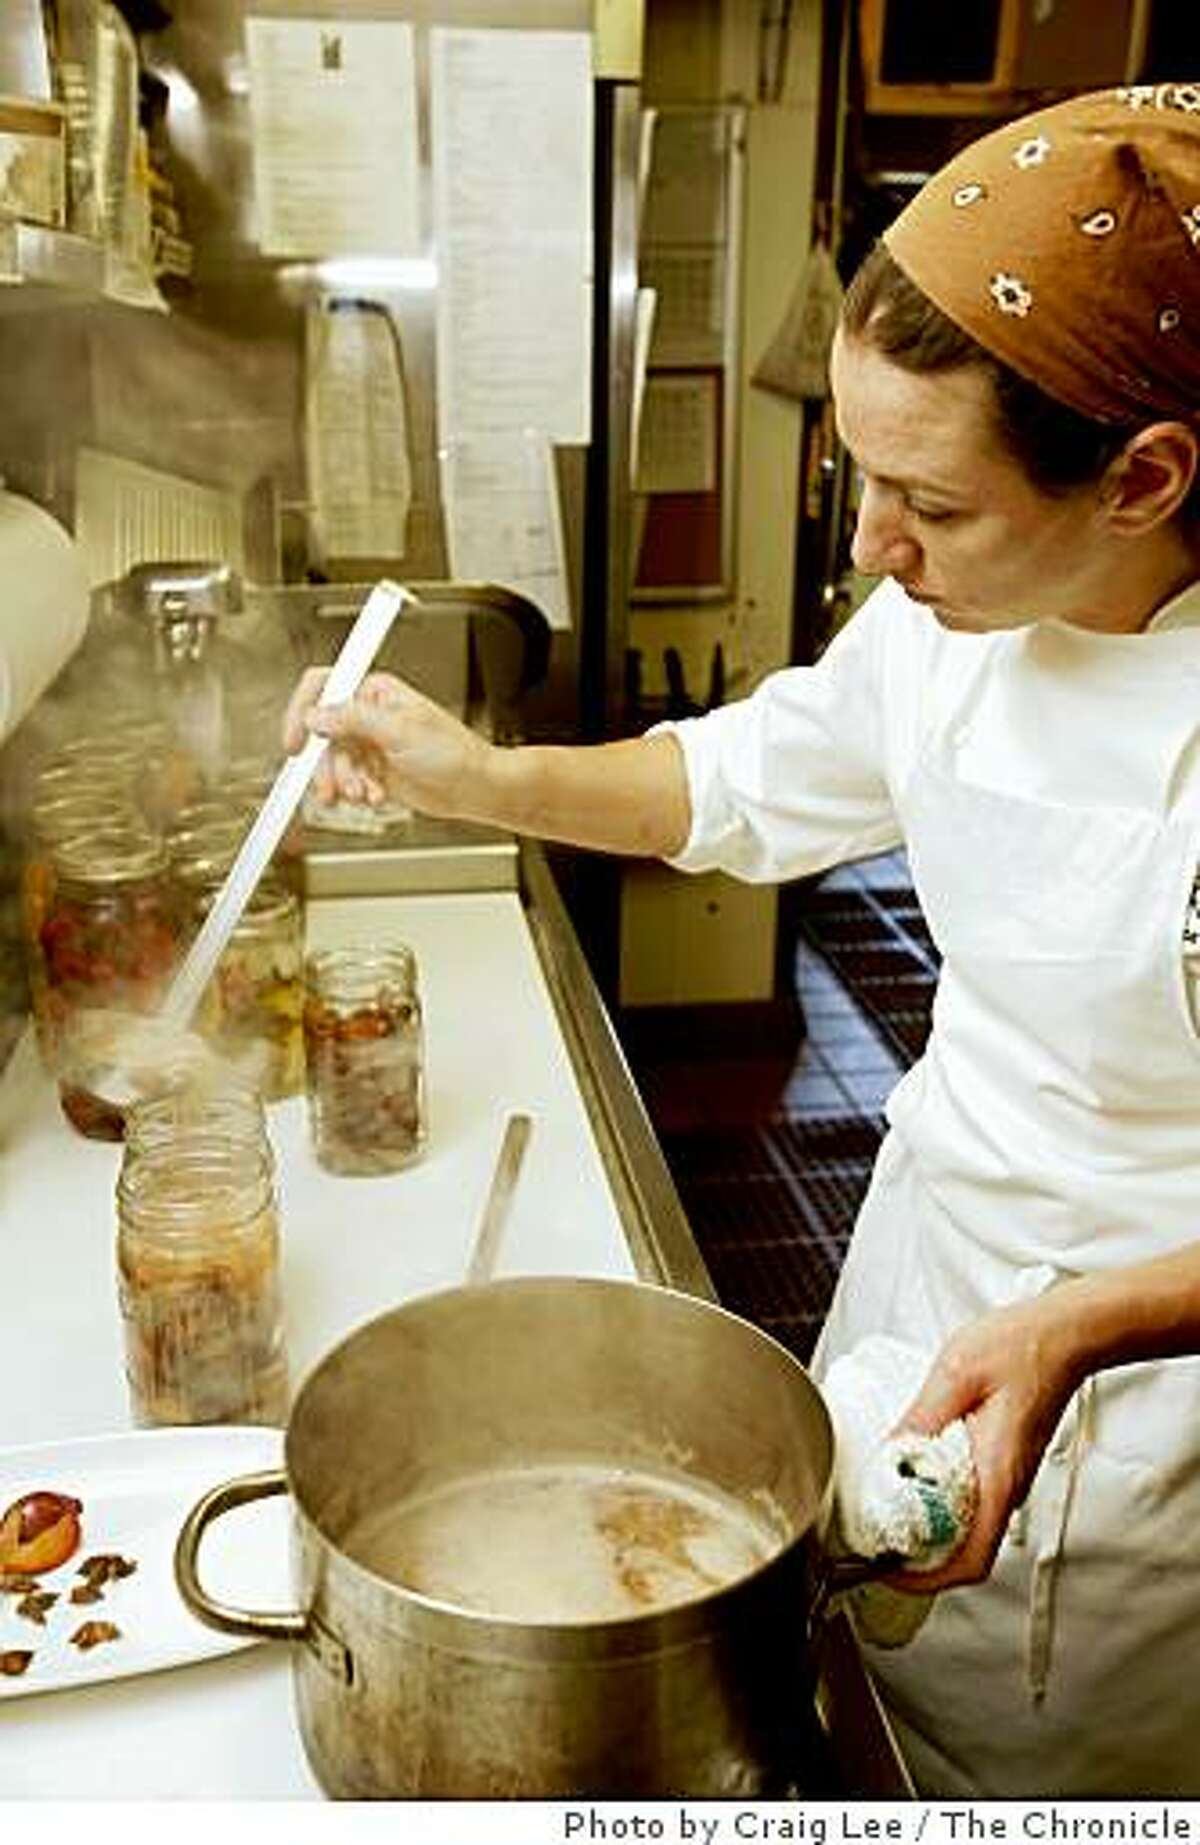 Erica Holland-Toll, chef at The Lark Creek Inn, making Santa Rosa plum pickle in Larkspur, Calif. on July 21, 2008. Erica Holland-Toll pouring the fresh made brine into jars of Santa Rosa plums.Photo by Craig Lee / The Chronicle